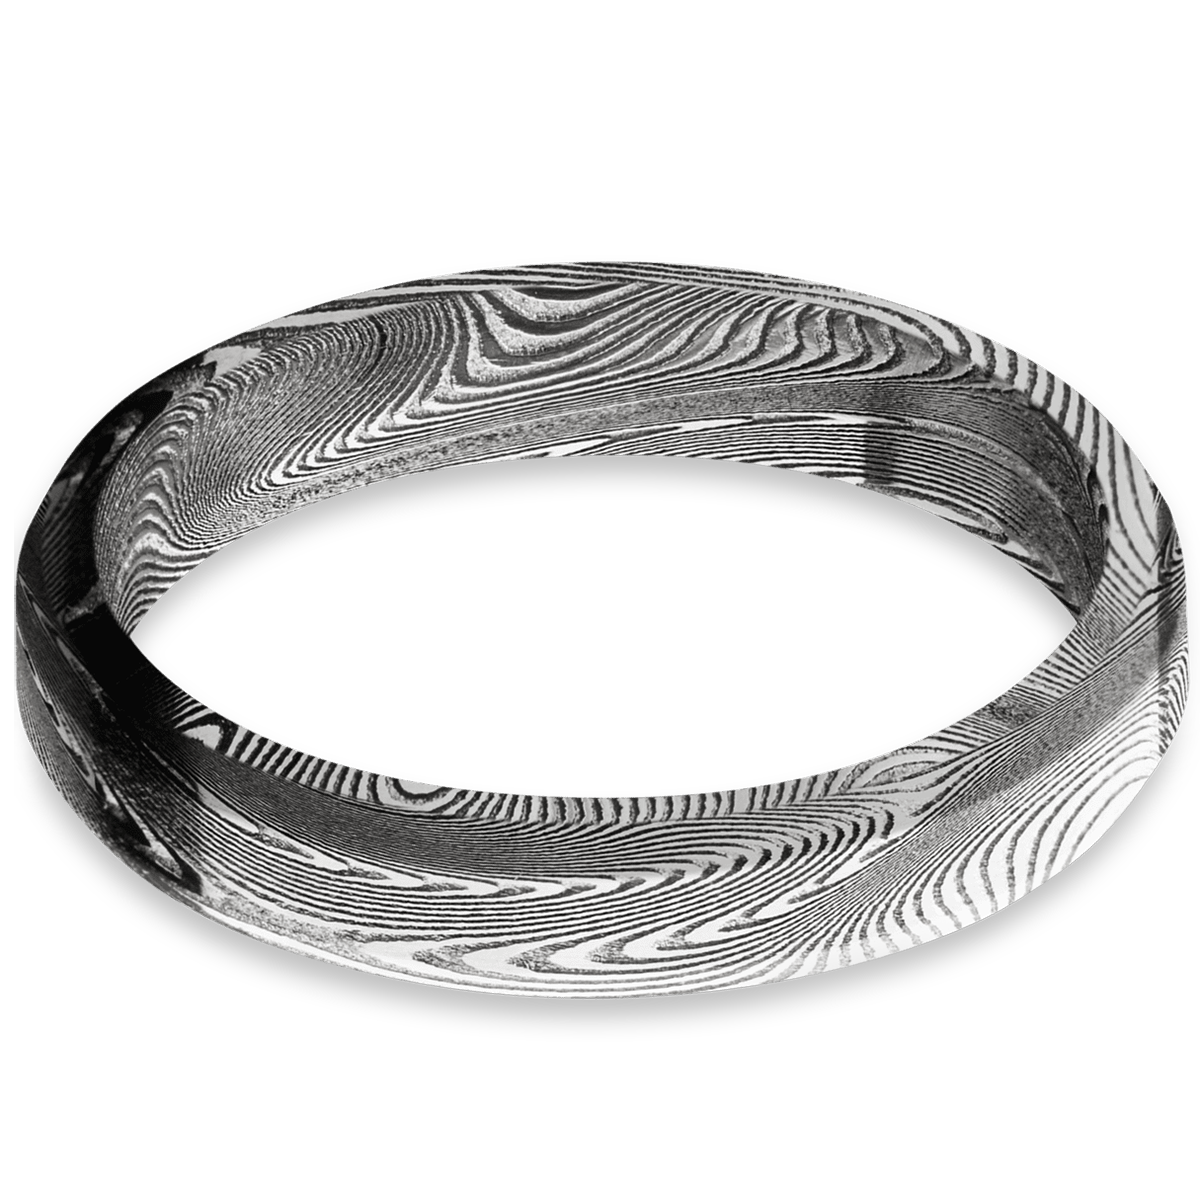 4mm wide beveled tightweave damascus engagement ring.